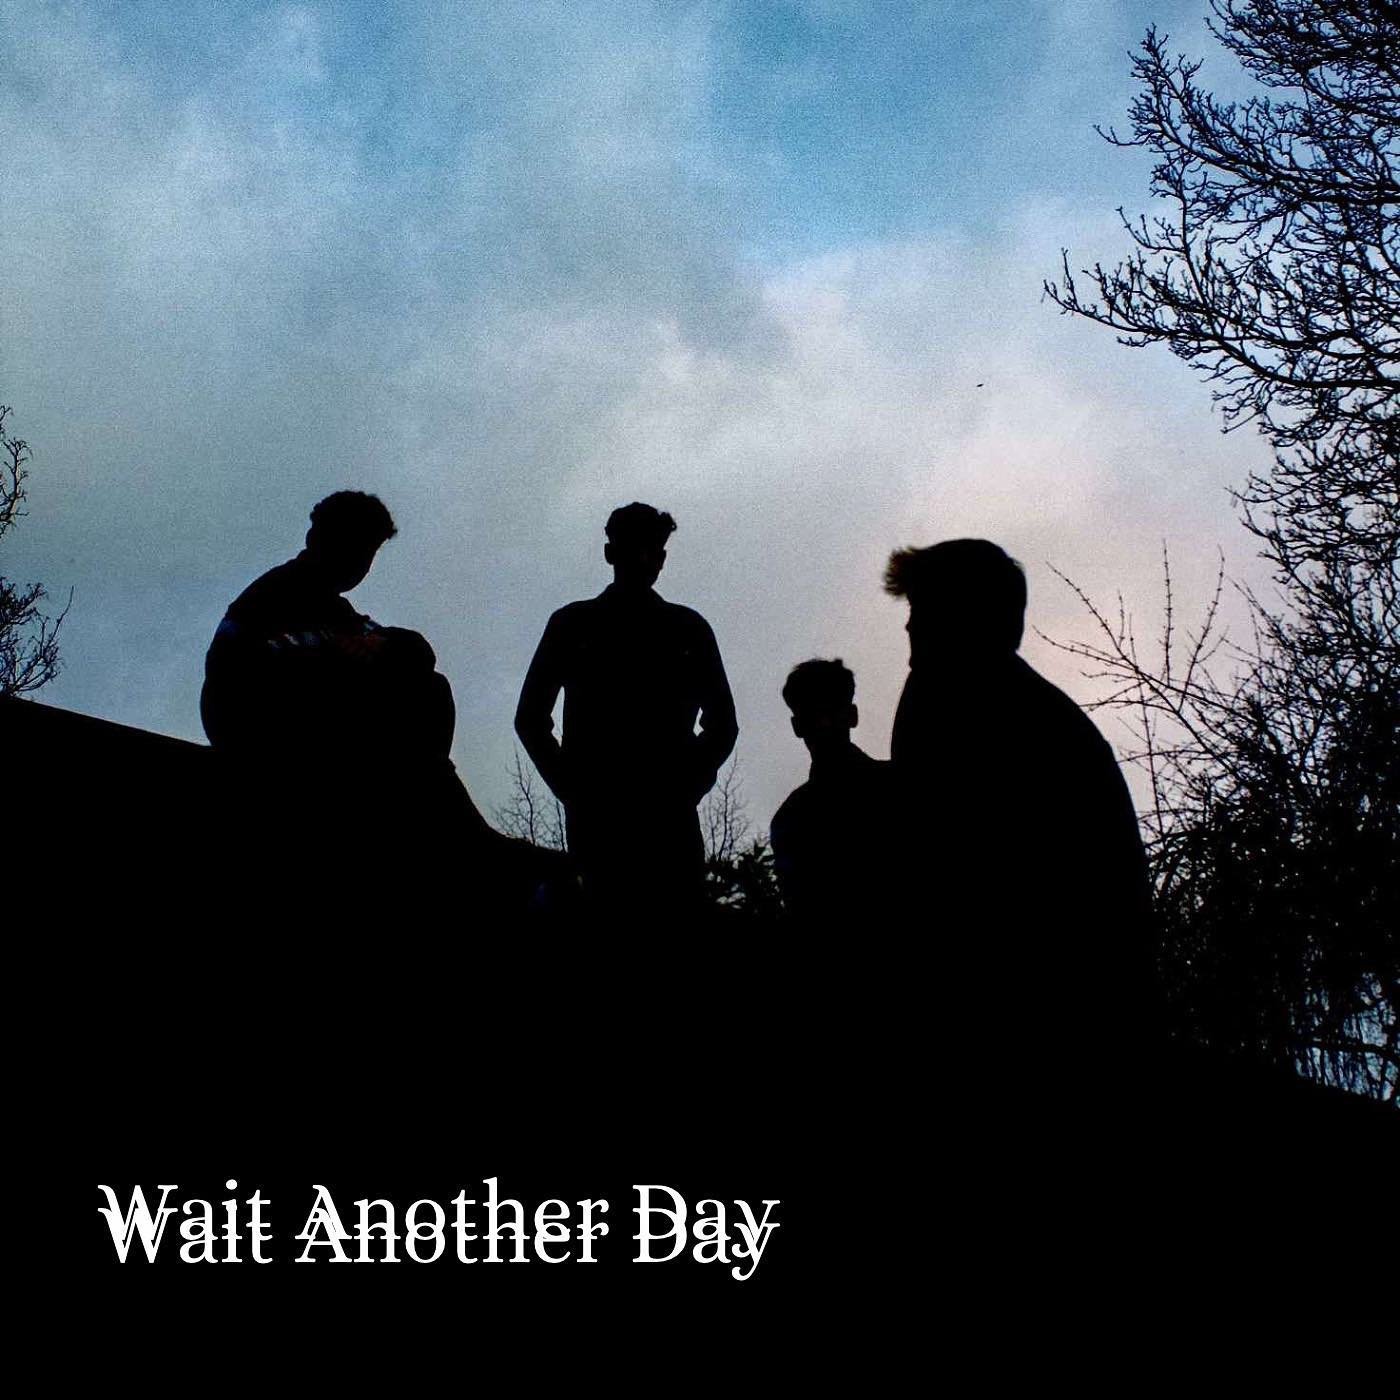 Gravy - Wait Another Day. Released Friday 26th April 2024

Leeds outfit &lsquo;Gravy&rsquo; are a Indie band with shoegaze influence, formed from two mates just messing around, vocalist and guitarist Harrison Bailey and drummer Louis Tuxworth. The ba